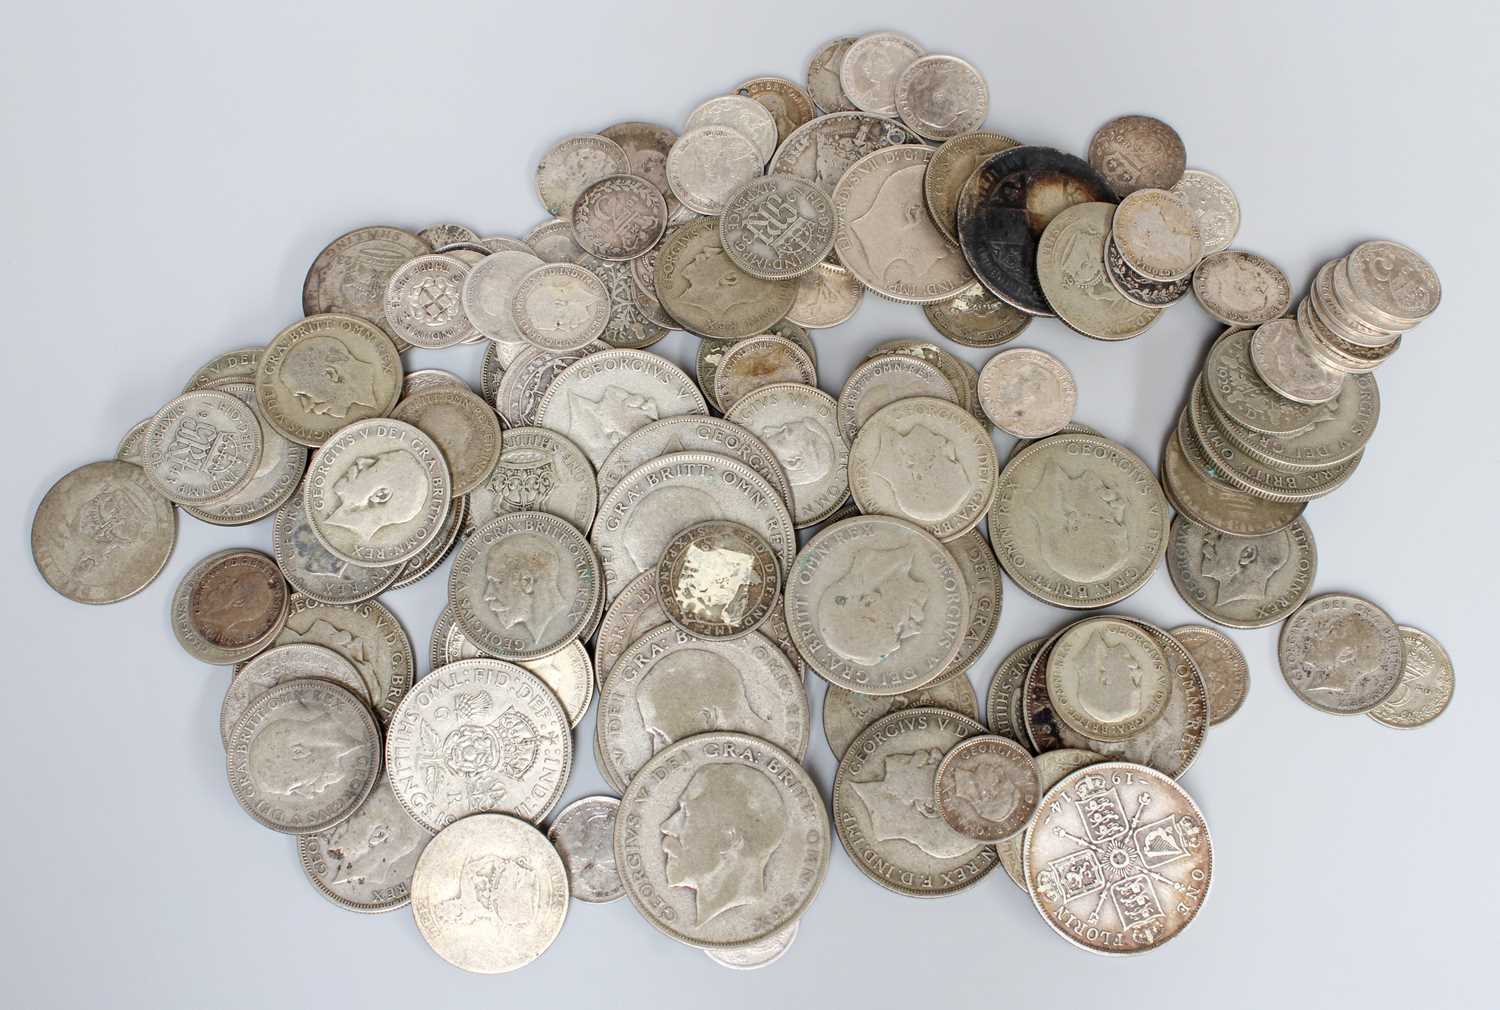 Assorted British Silver Coinage; mixed denominations and grades containing 112.6g of pre-20 silver